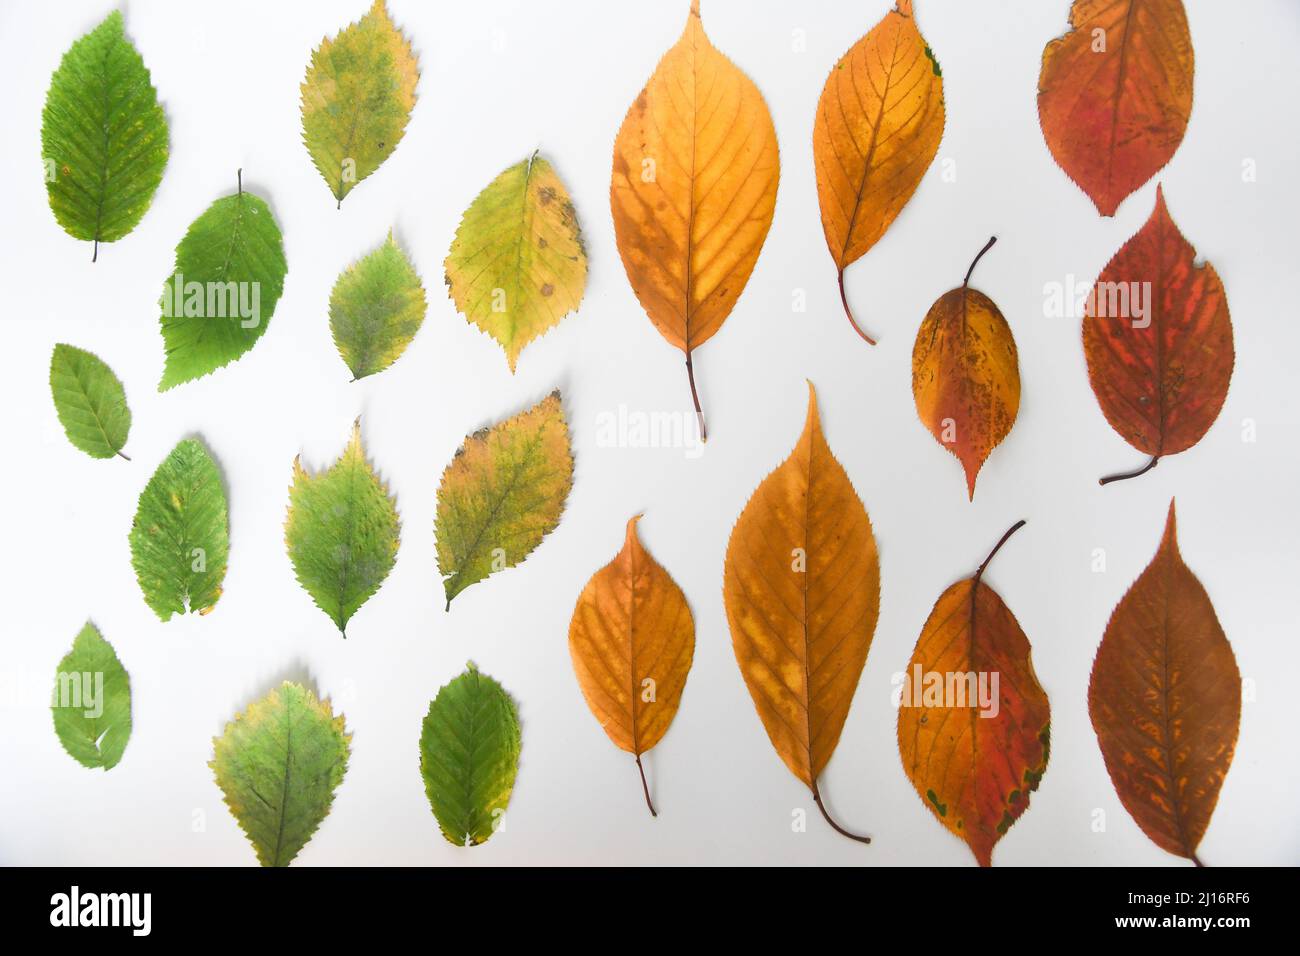 Overhead of different colored leaves of different seasons Stock Photo